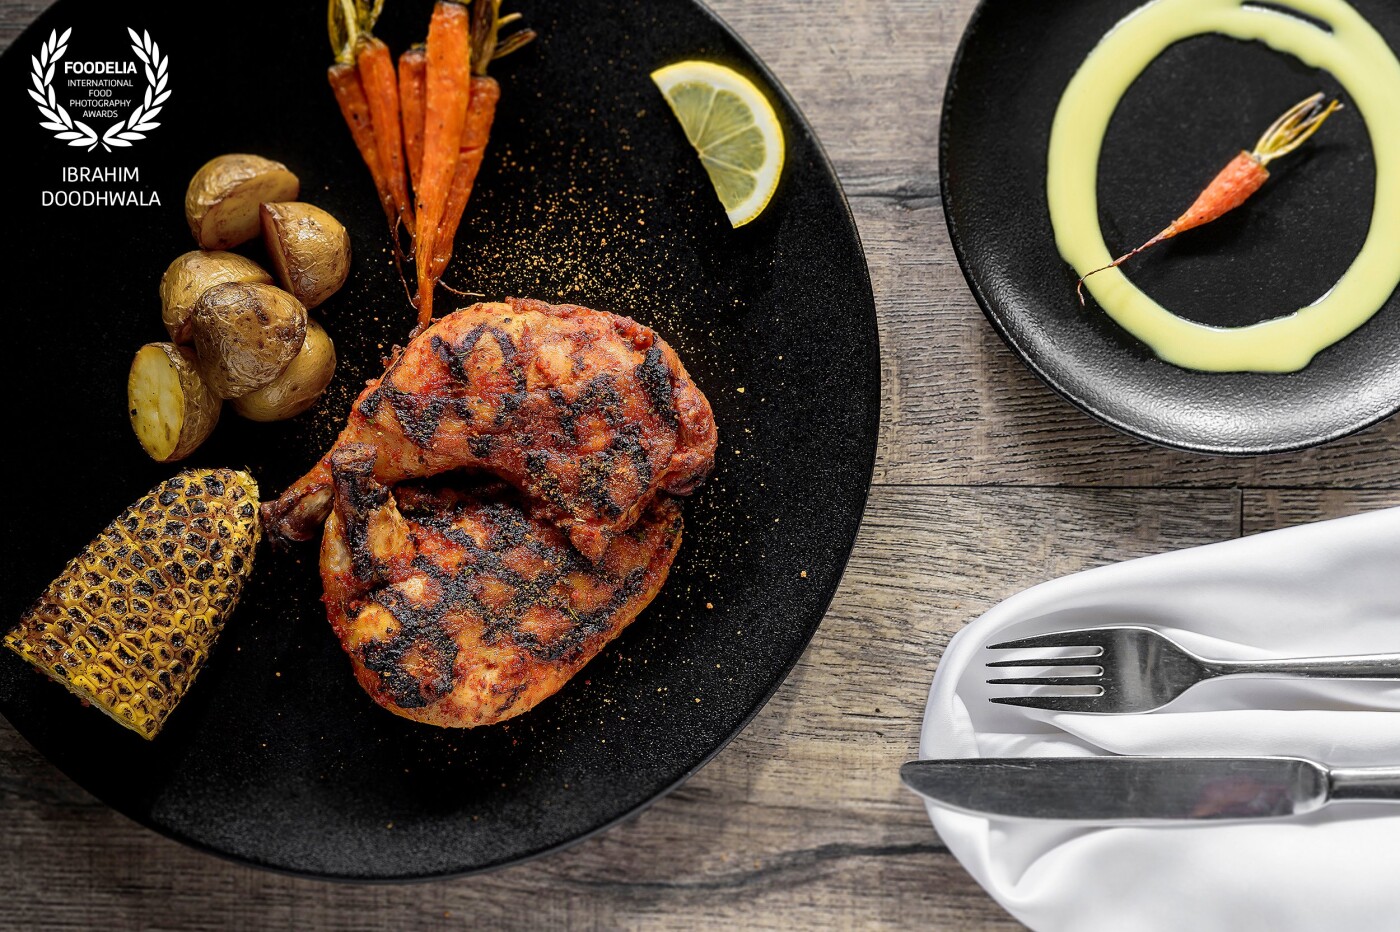 This particular shot is from the photoshoot that I did for the restaurant Theory, Mumbai. Peri-peri chicken which is cooked to perfection.  The shoot was done at the restaurant itself. The shot was styled by my team.